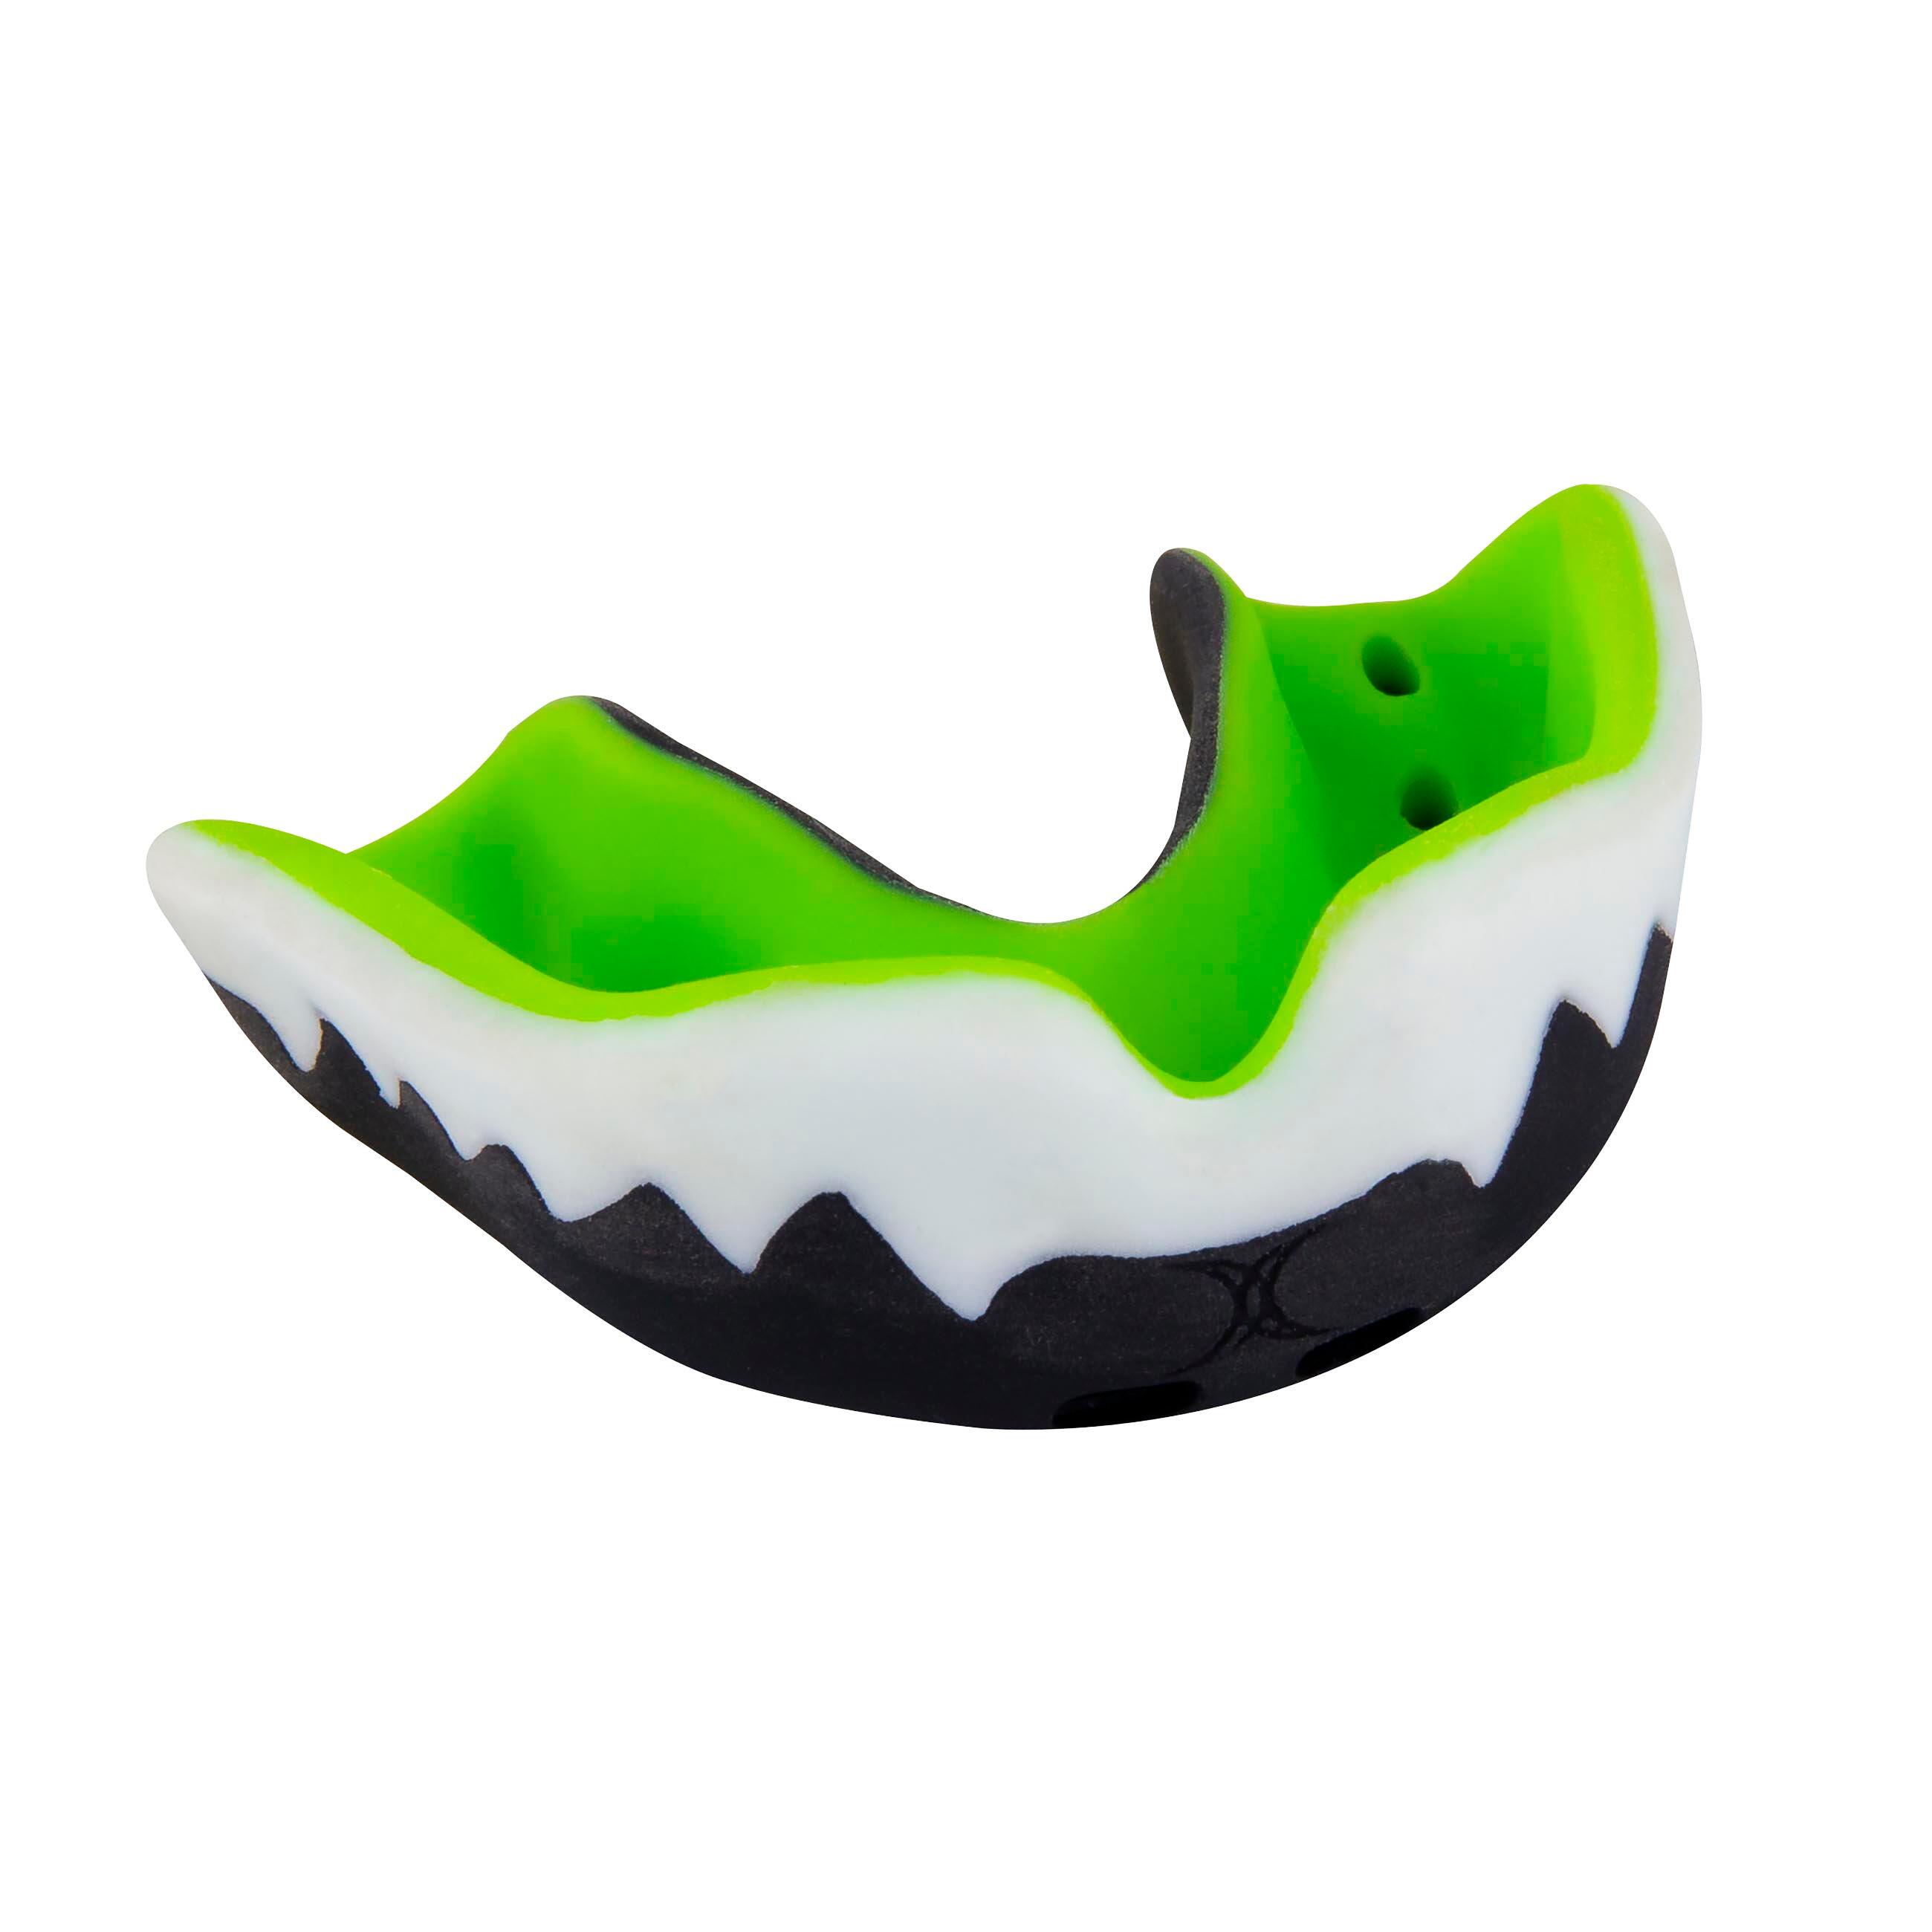 Viper Pro3 Mouthguard - Navy / Pink - Adult 2/3